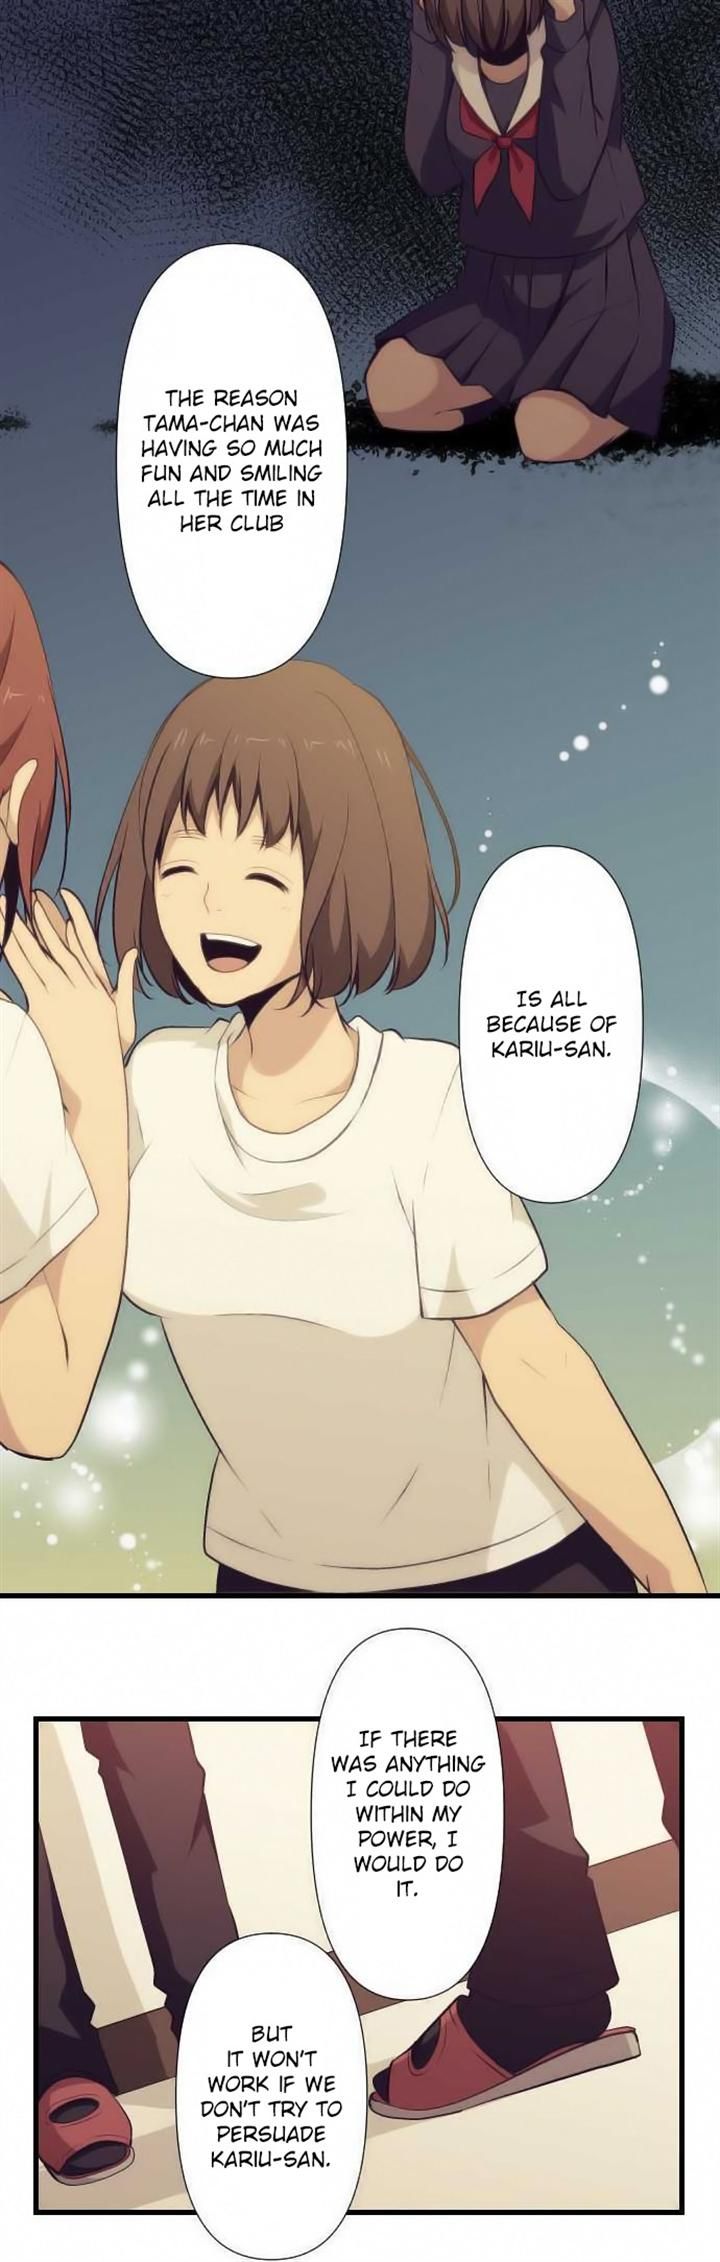 ReLIFE 67